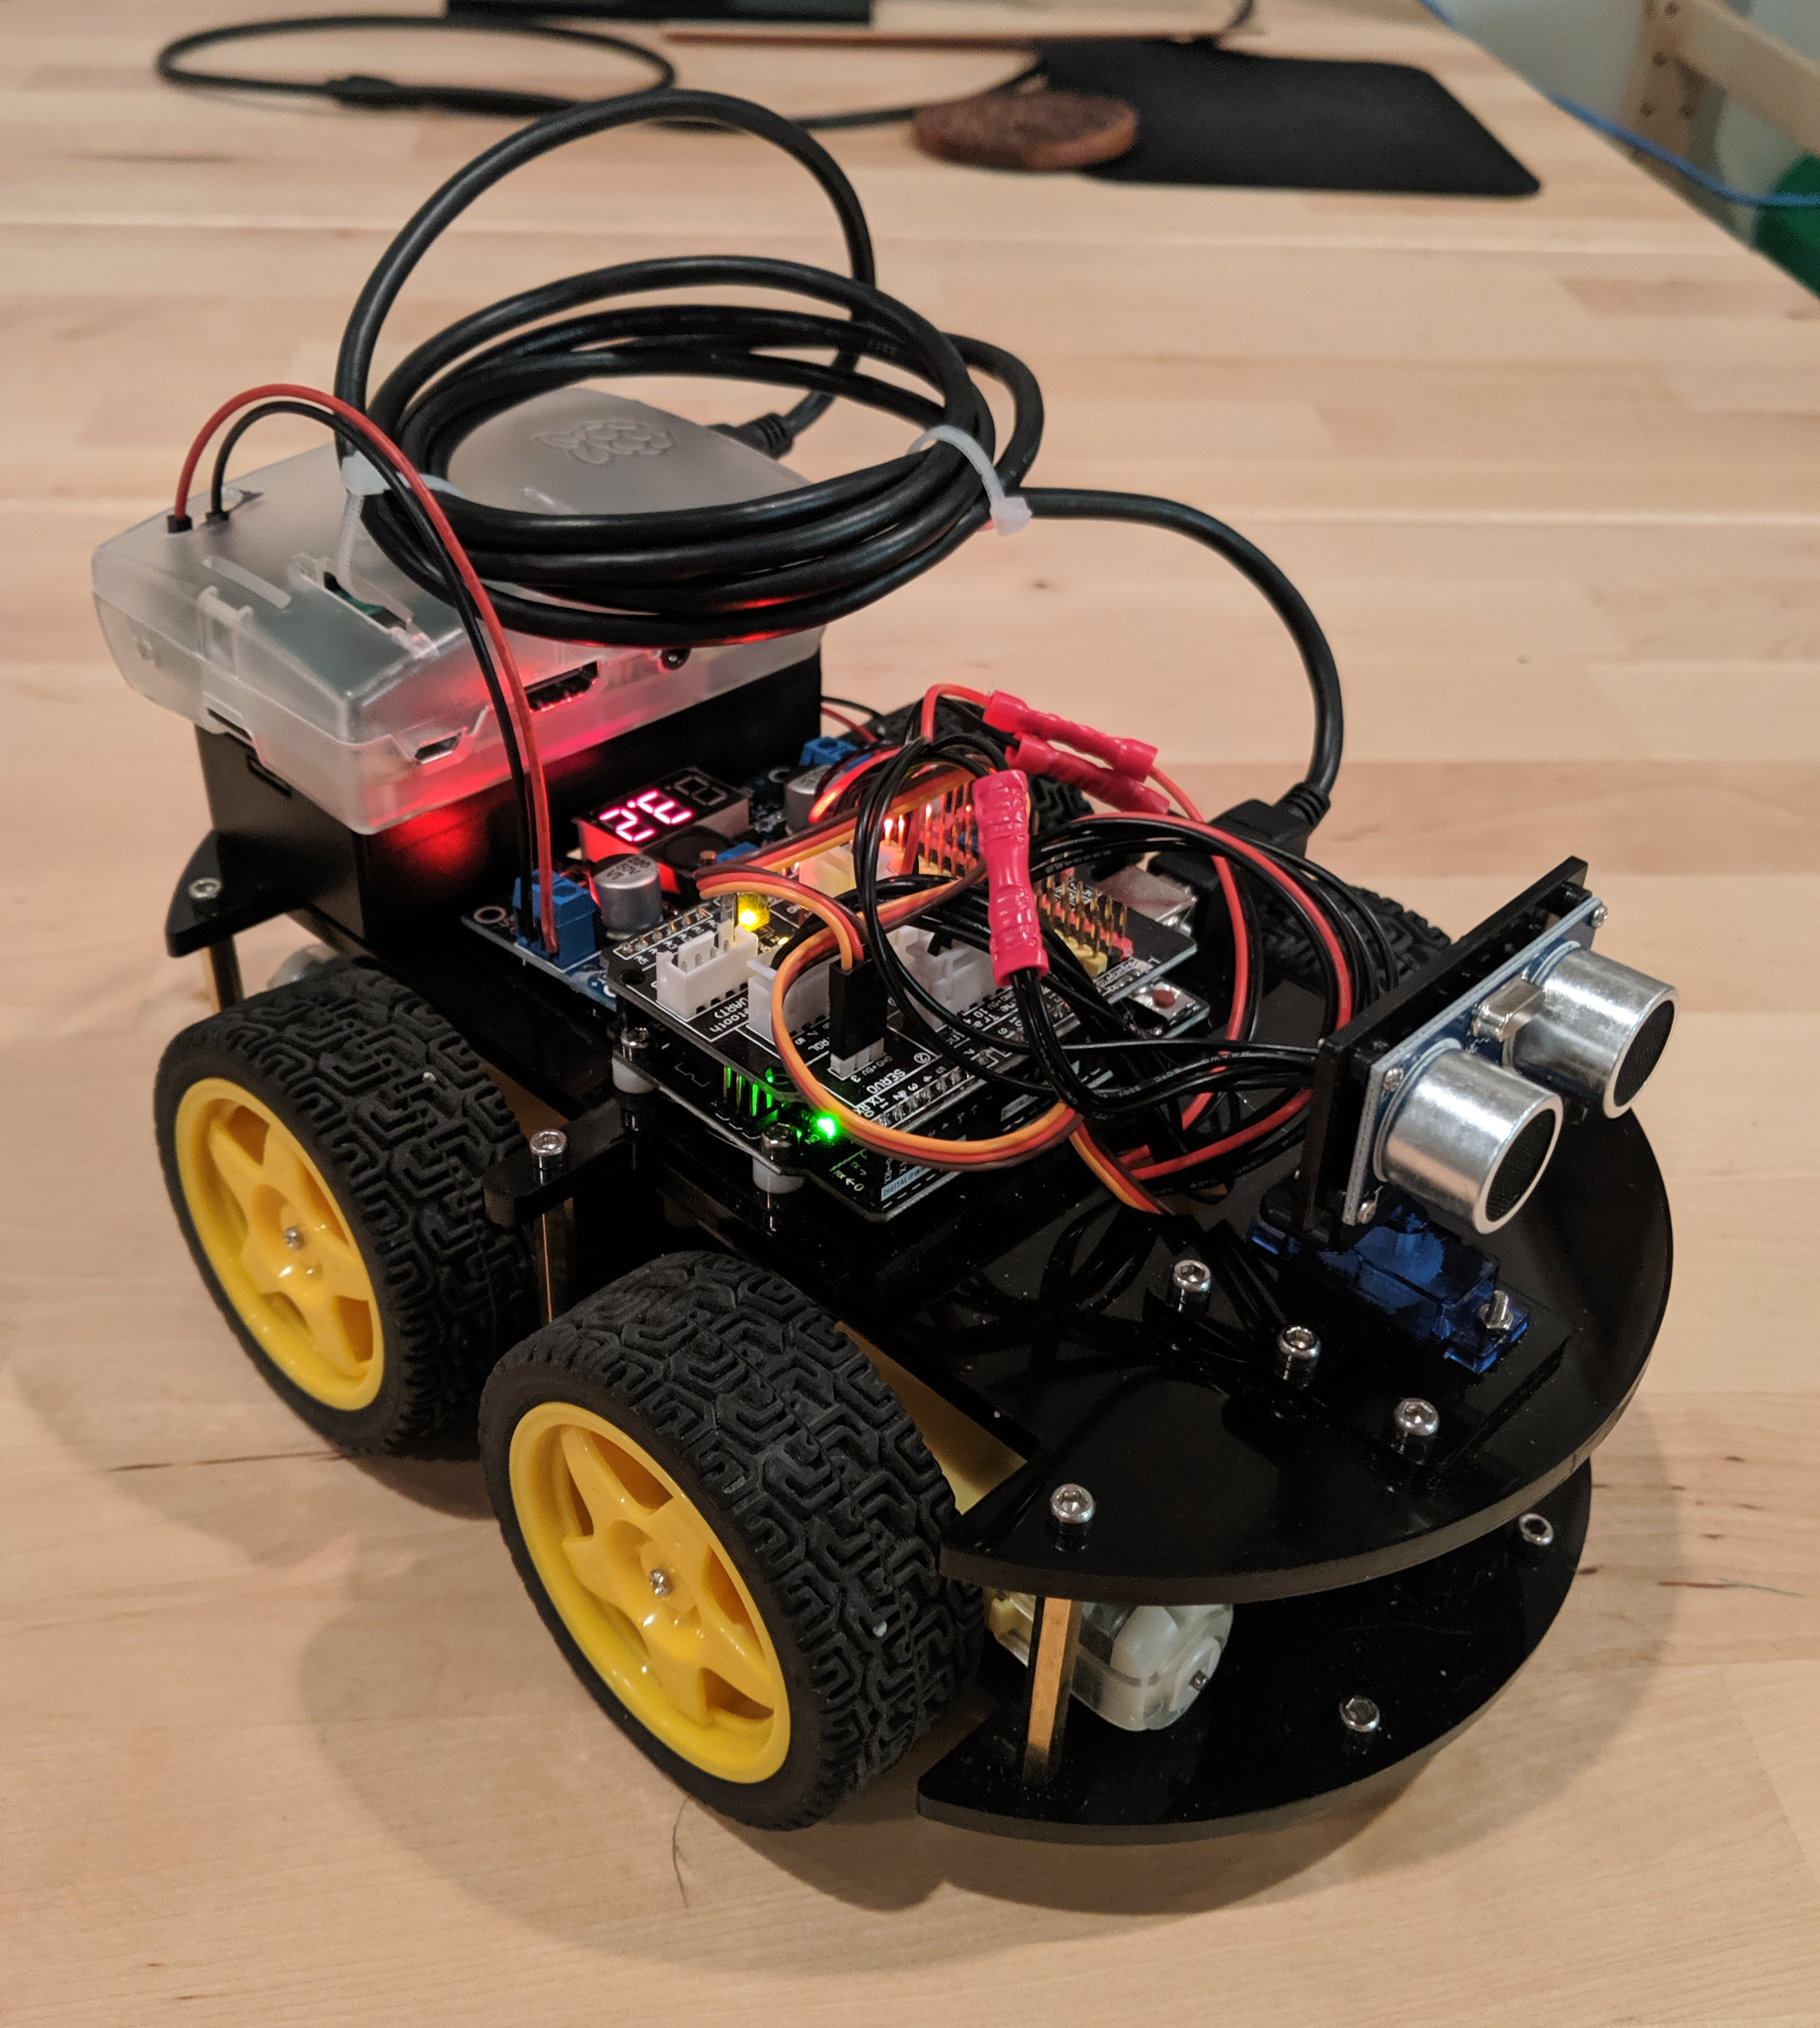 The small robot resembles a car, with large wheels and many wires protruding from the top